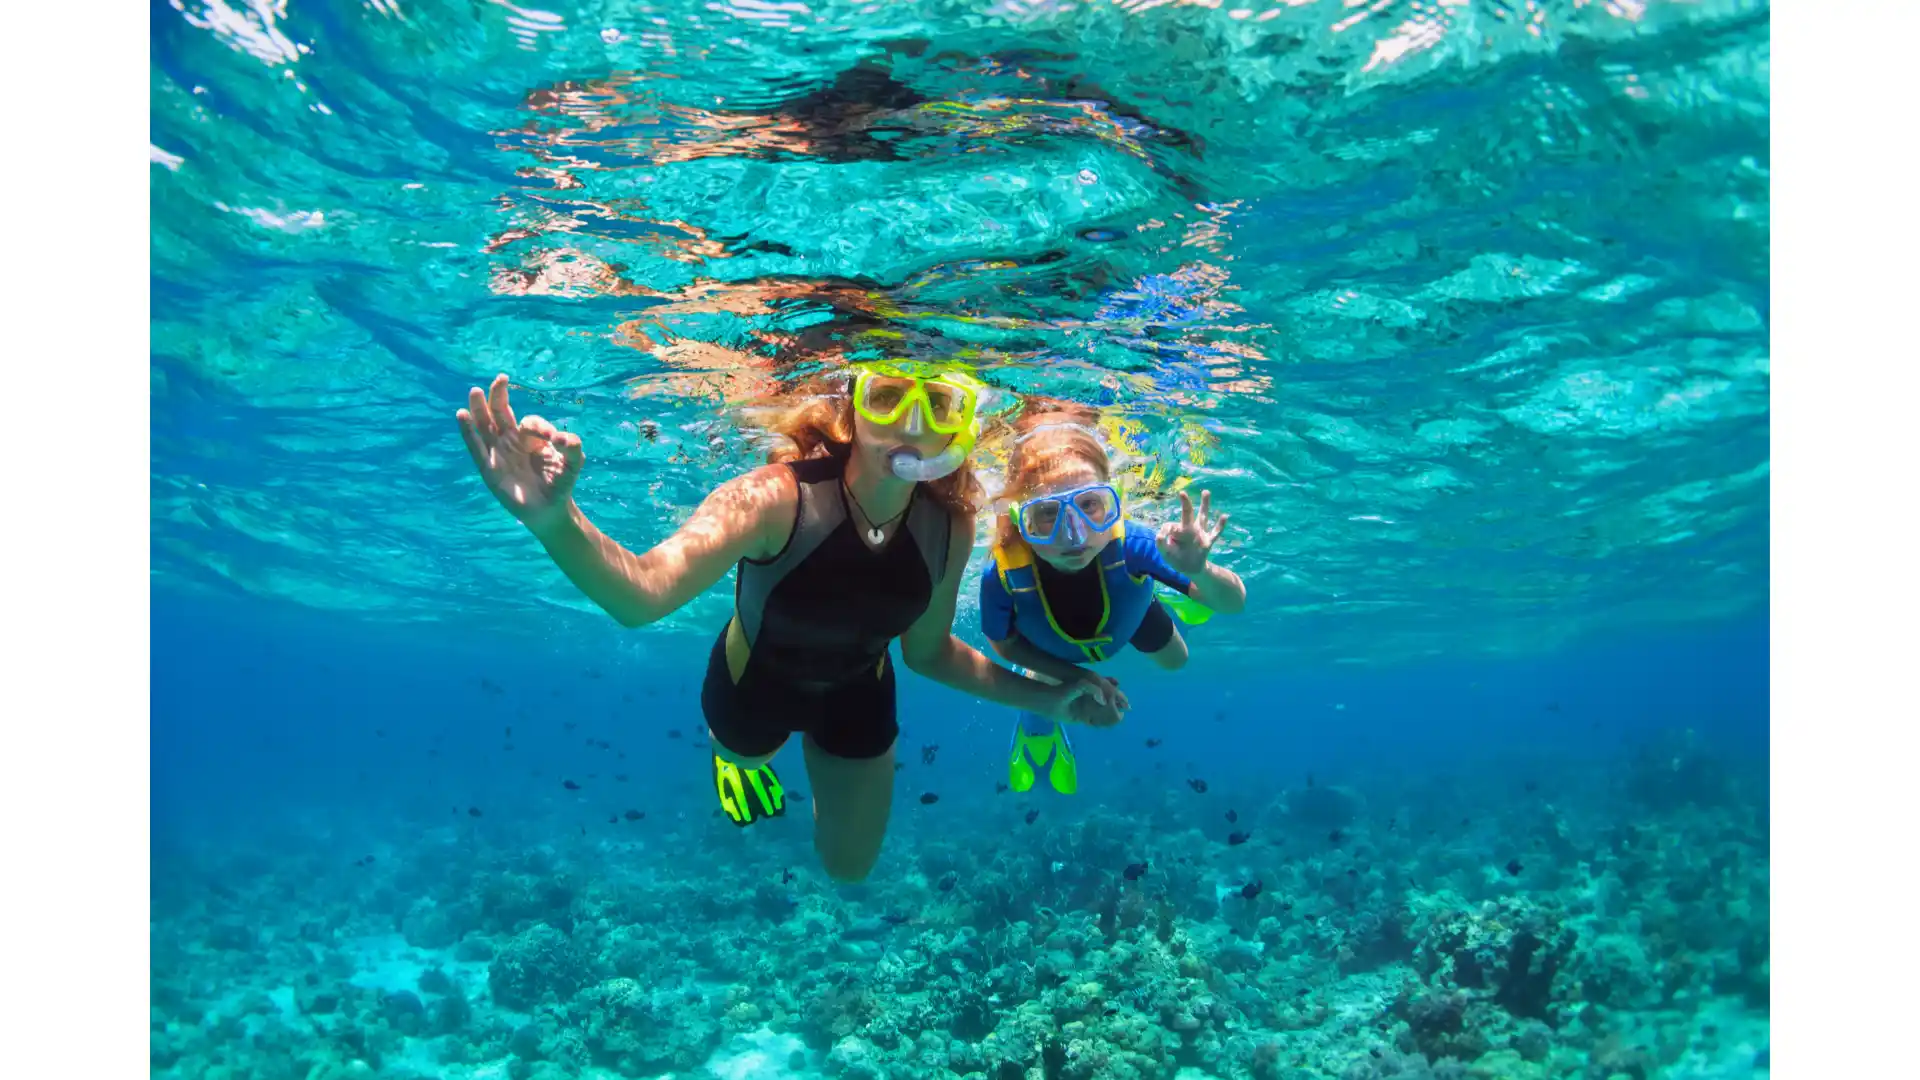 GK Palms Resort Explore the Indian Ocean-underwater world through snorkeling and diving